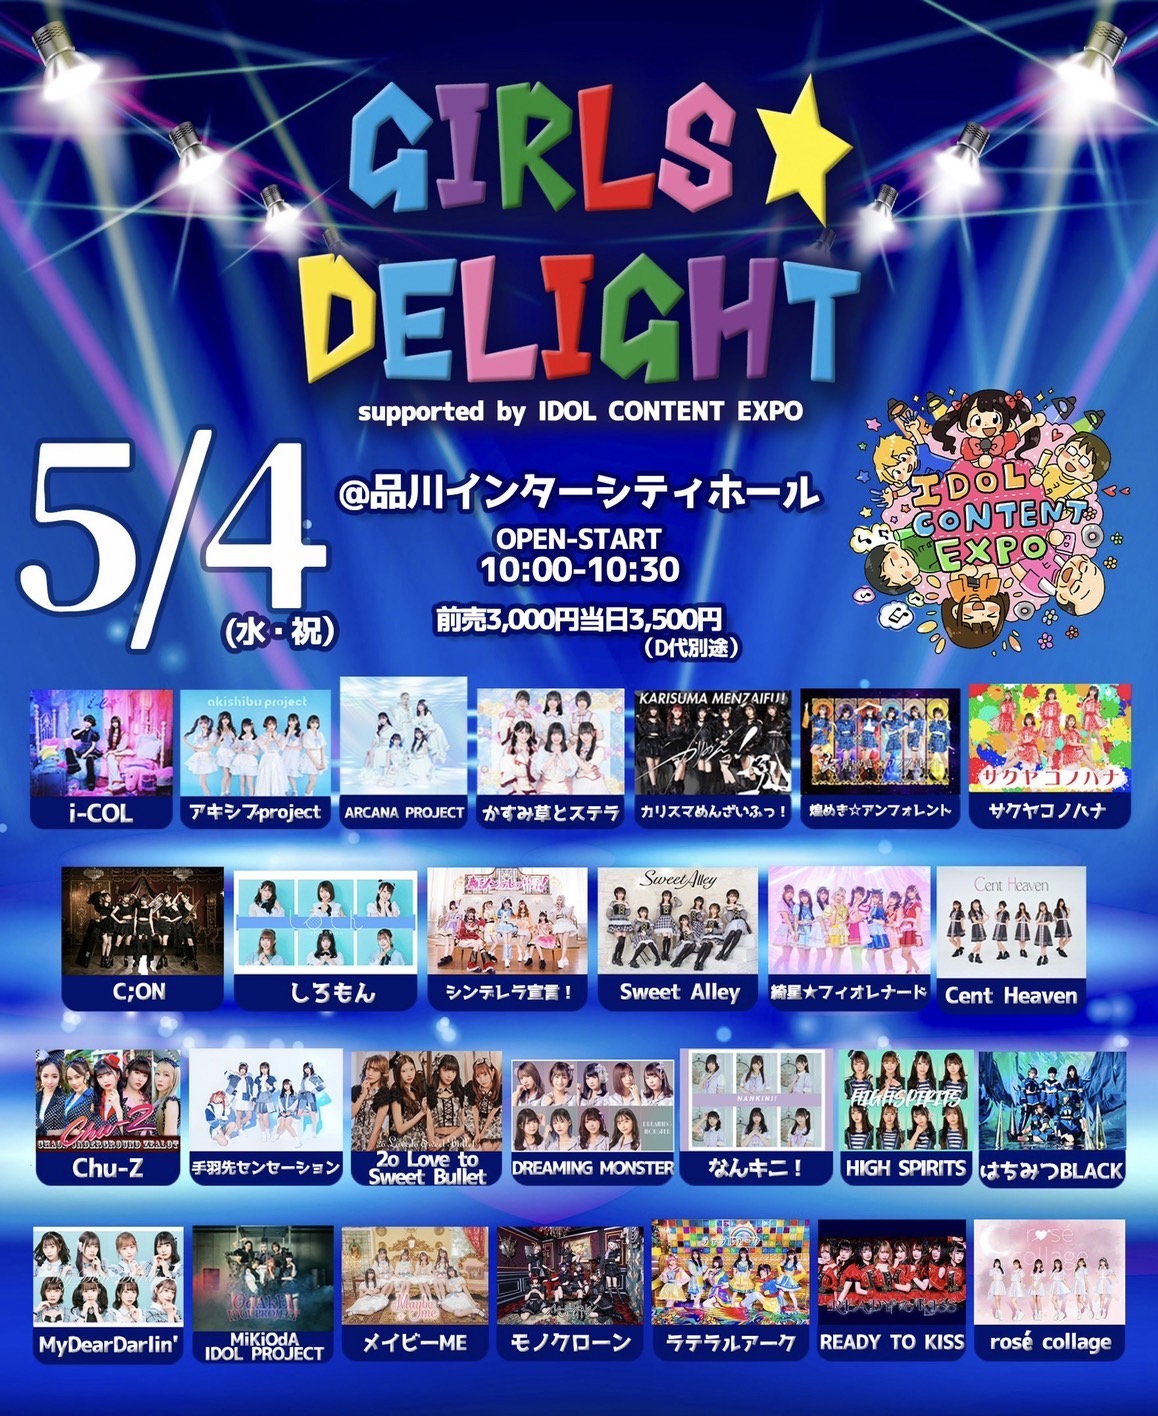 『GIRLS☆DELIGHT supported by IDOL CONTENT EXPO』